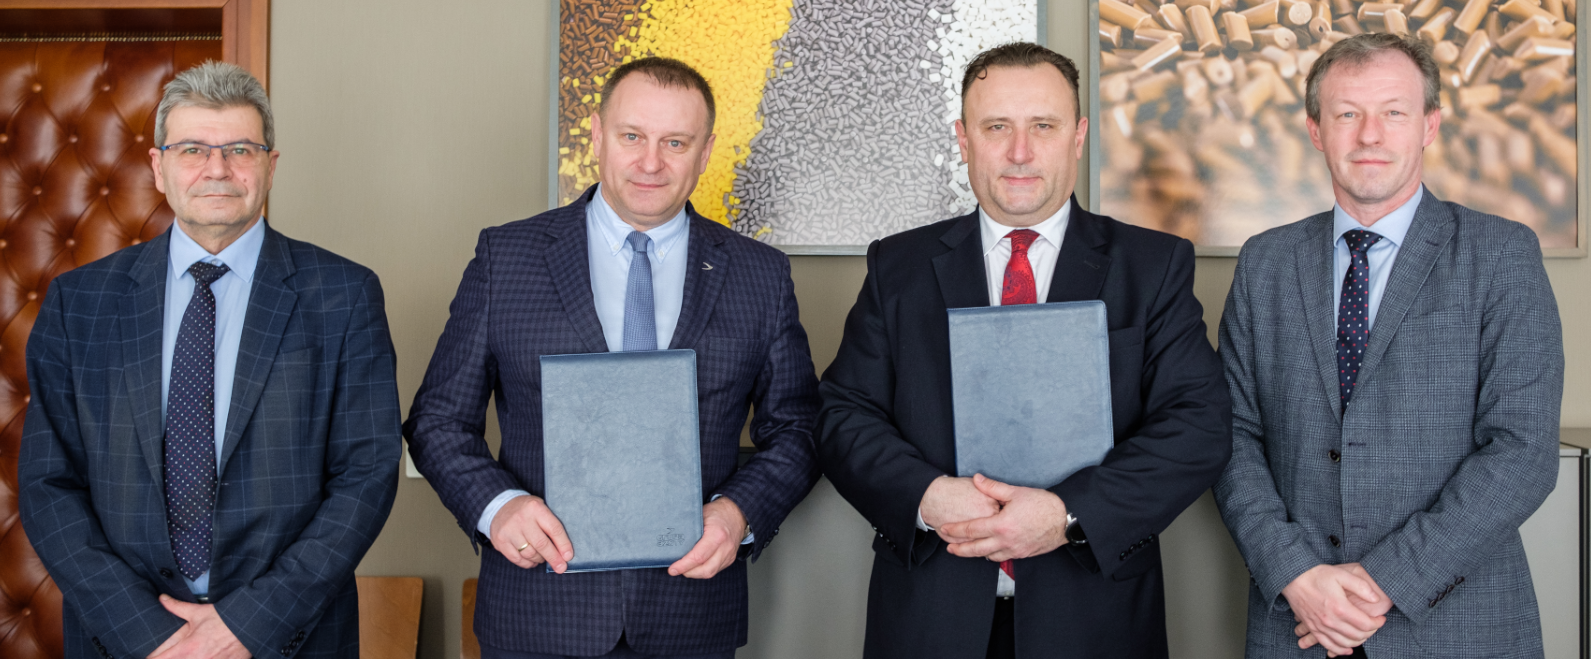 Cooperation between Grupa Azoty and State Higher Vocational School in Nysa